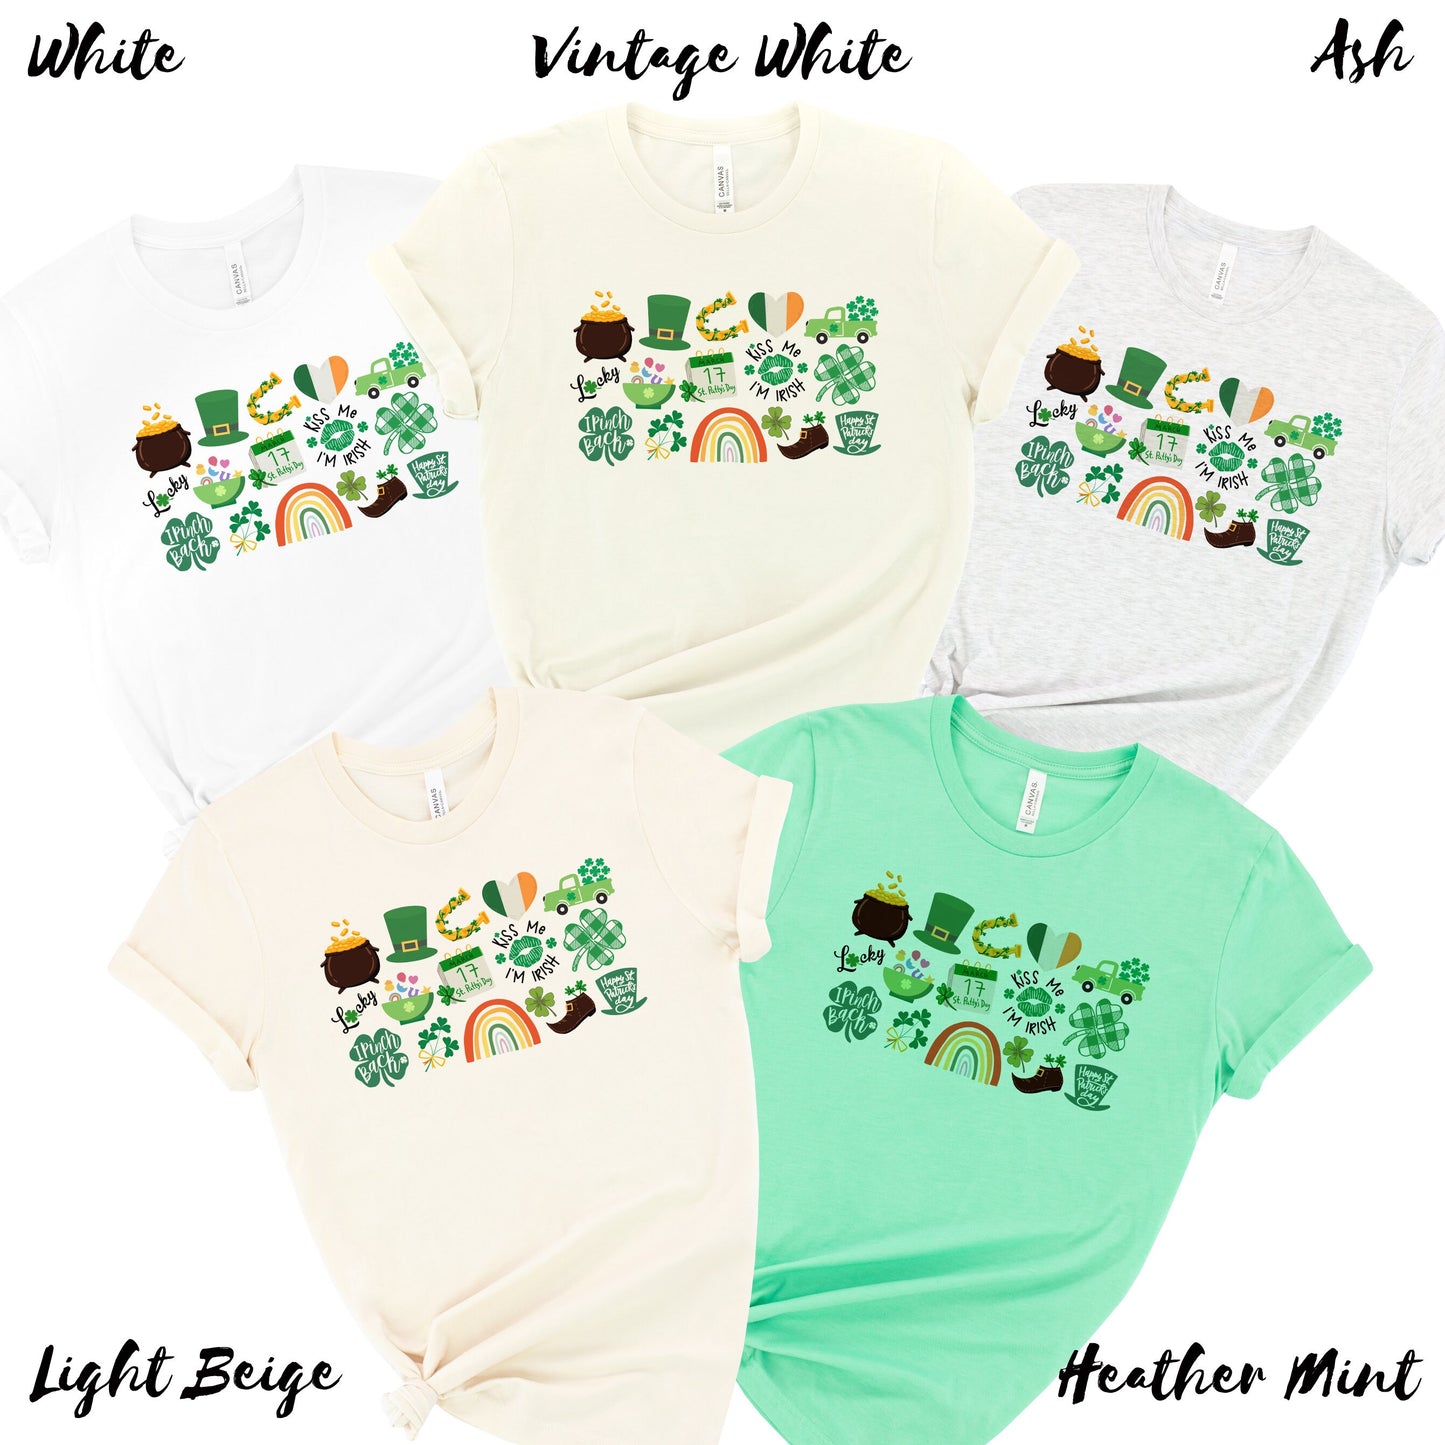 Its the Little Things | Happy St. Patrick's Day of Green | UNISEX Relaxed Jersey T-Shirt for Women